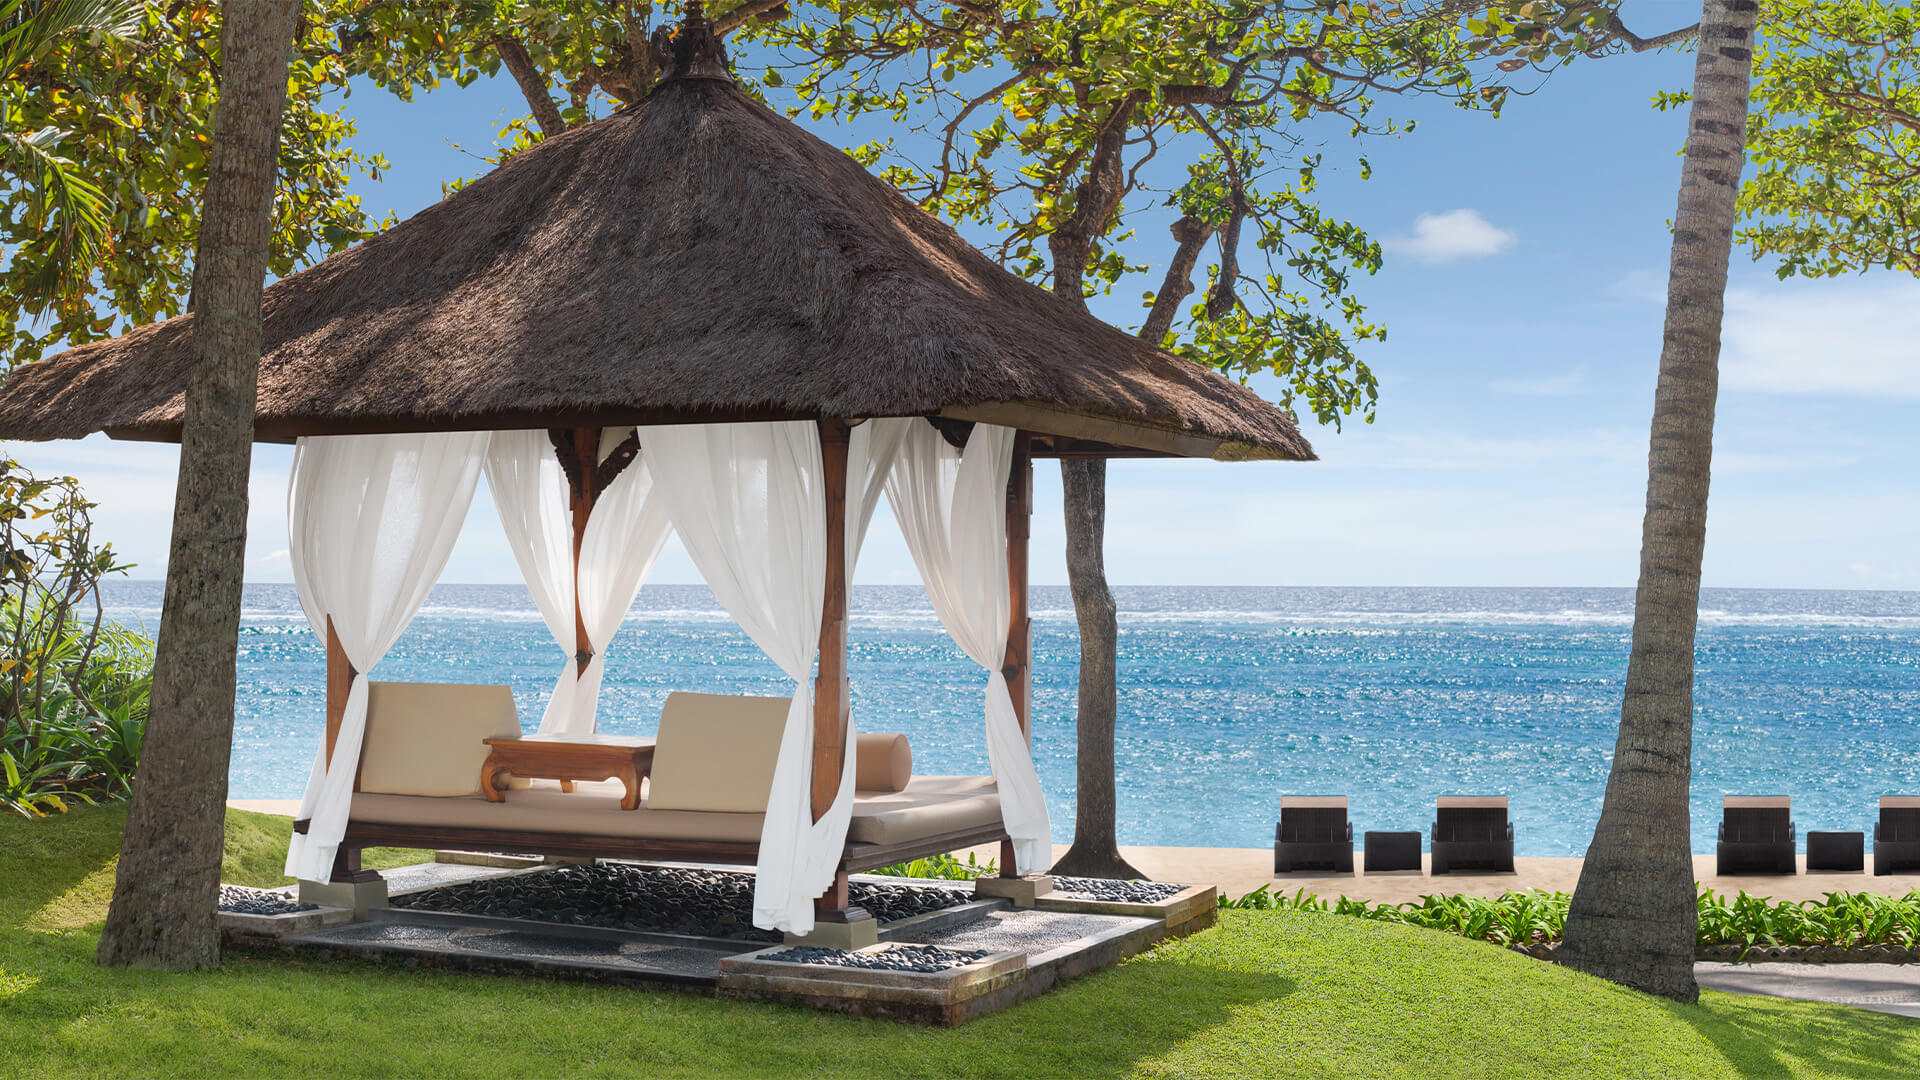 Gazebo with sun loungers on a beach in front of the ocean